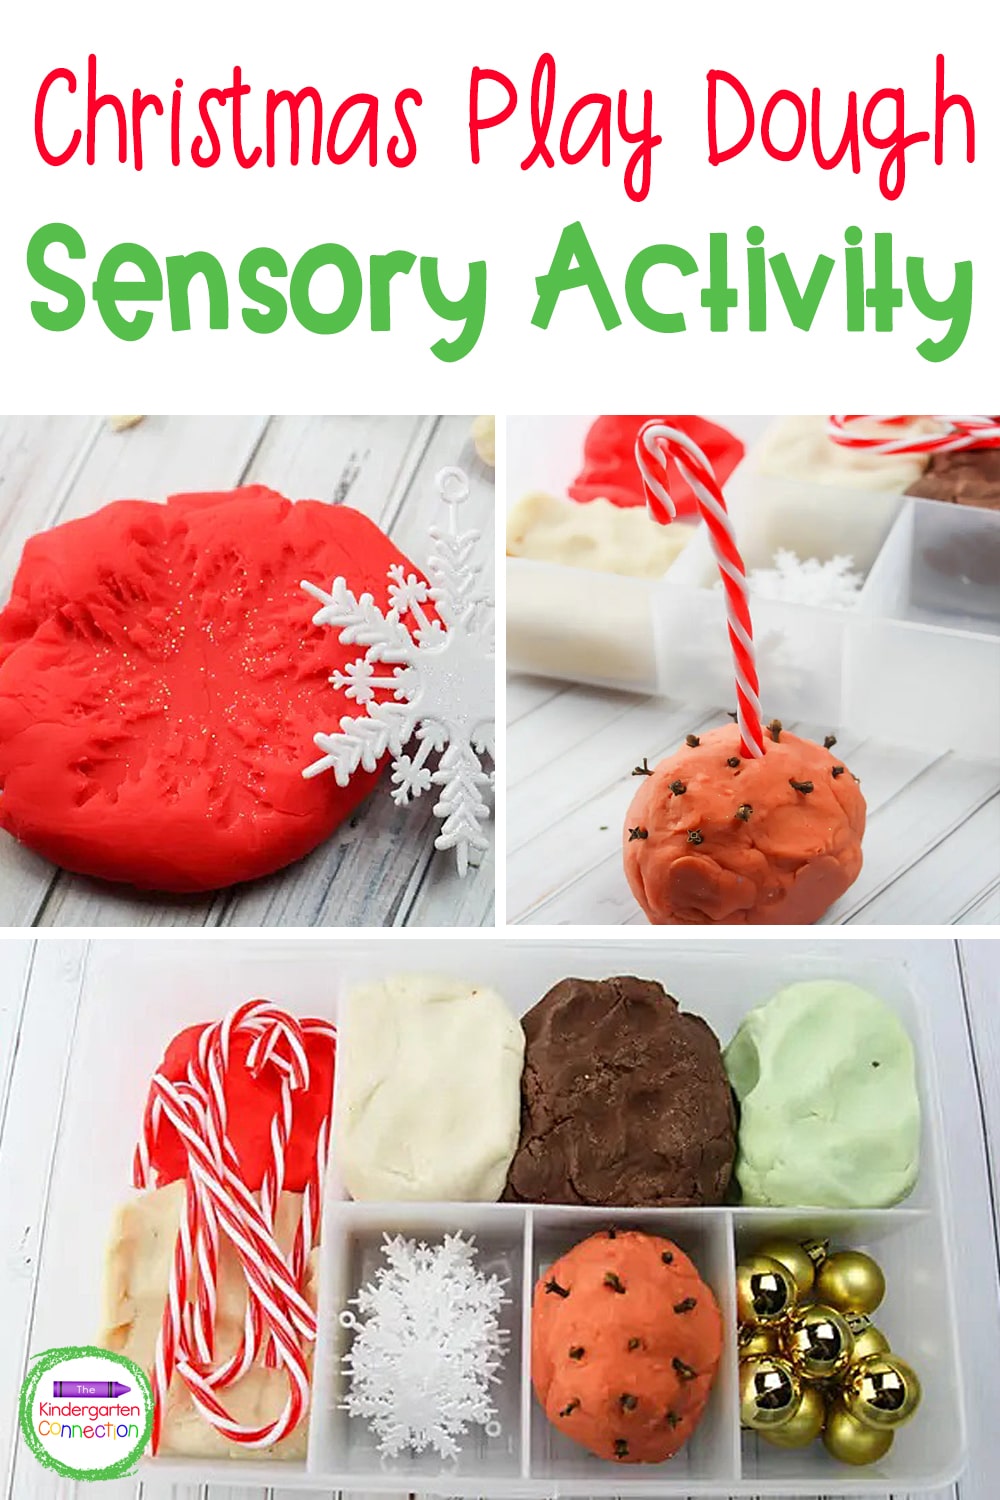 This Christmas play dough kit is so fun and makes a great sensory activity for the classroom or even a great homemade Christmas gift!